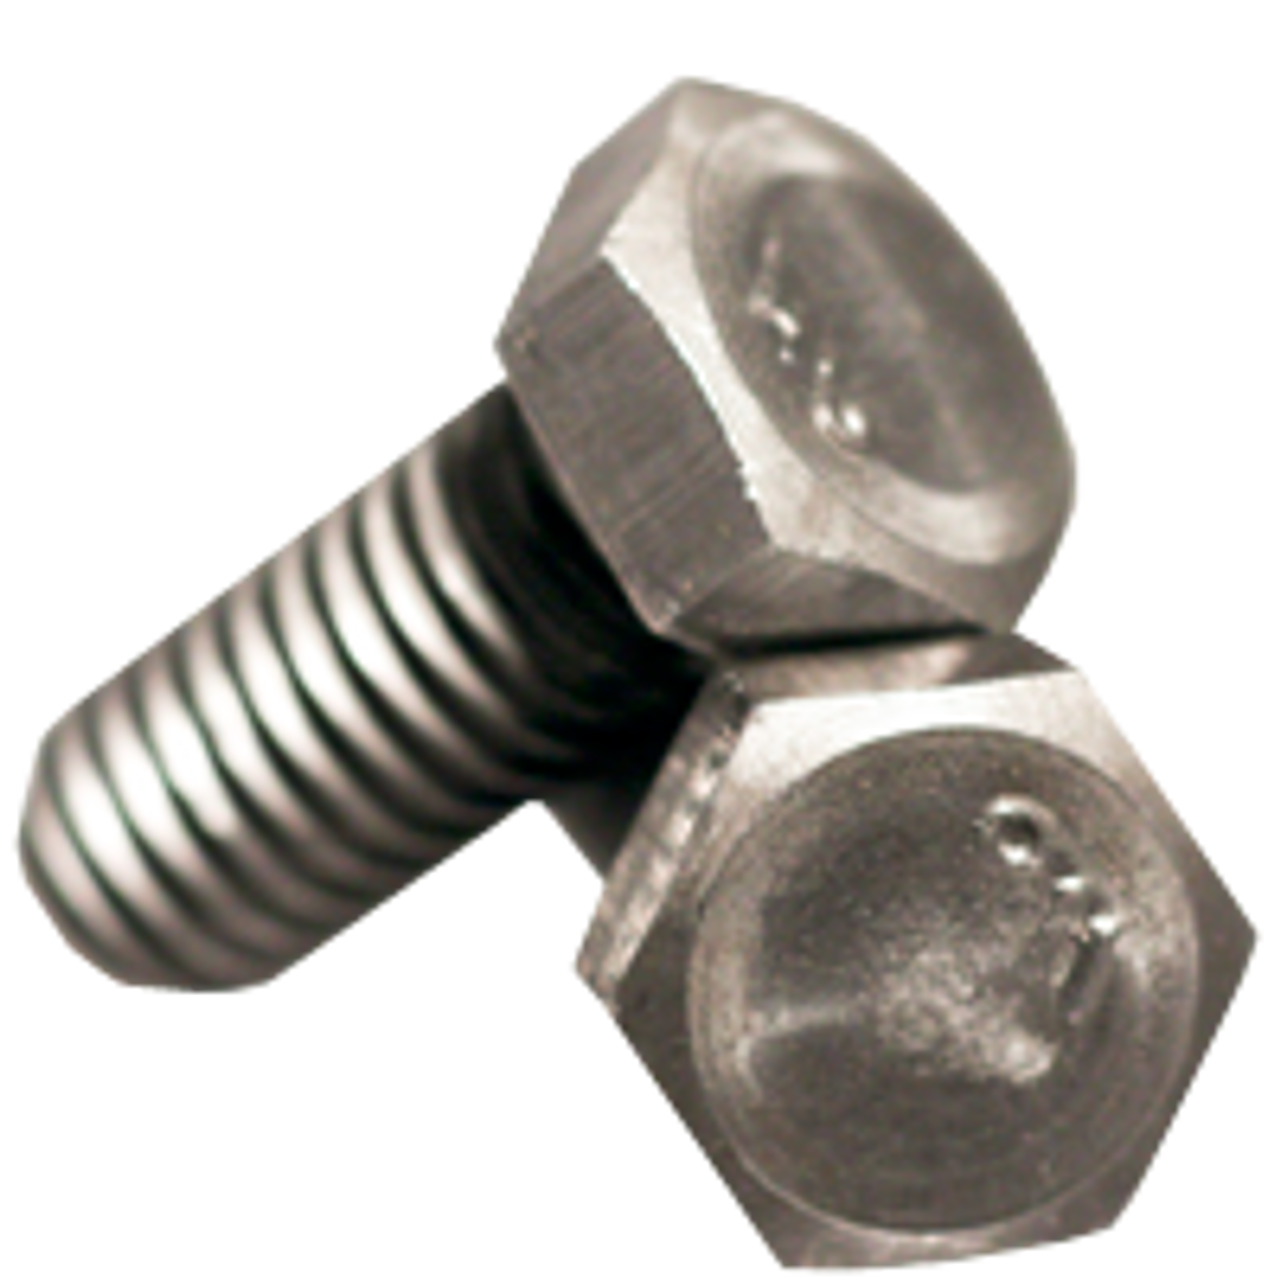 US Made Partially Threaded 3/8-16 Thread Size 3/8-16 Thread Size 5 Length Small Parts 3780CSP 5 Length Black Oxide Alloy Steel Socket Head Cap Screw Pack of 50 Hex Socket Drive 